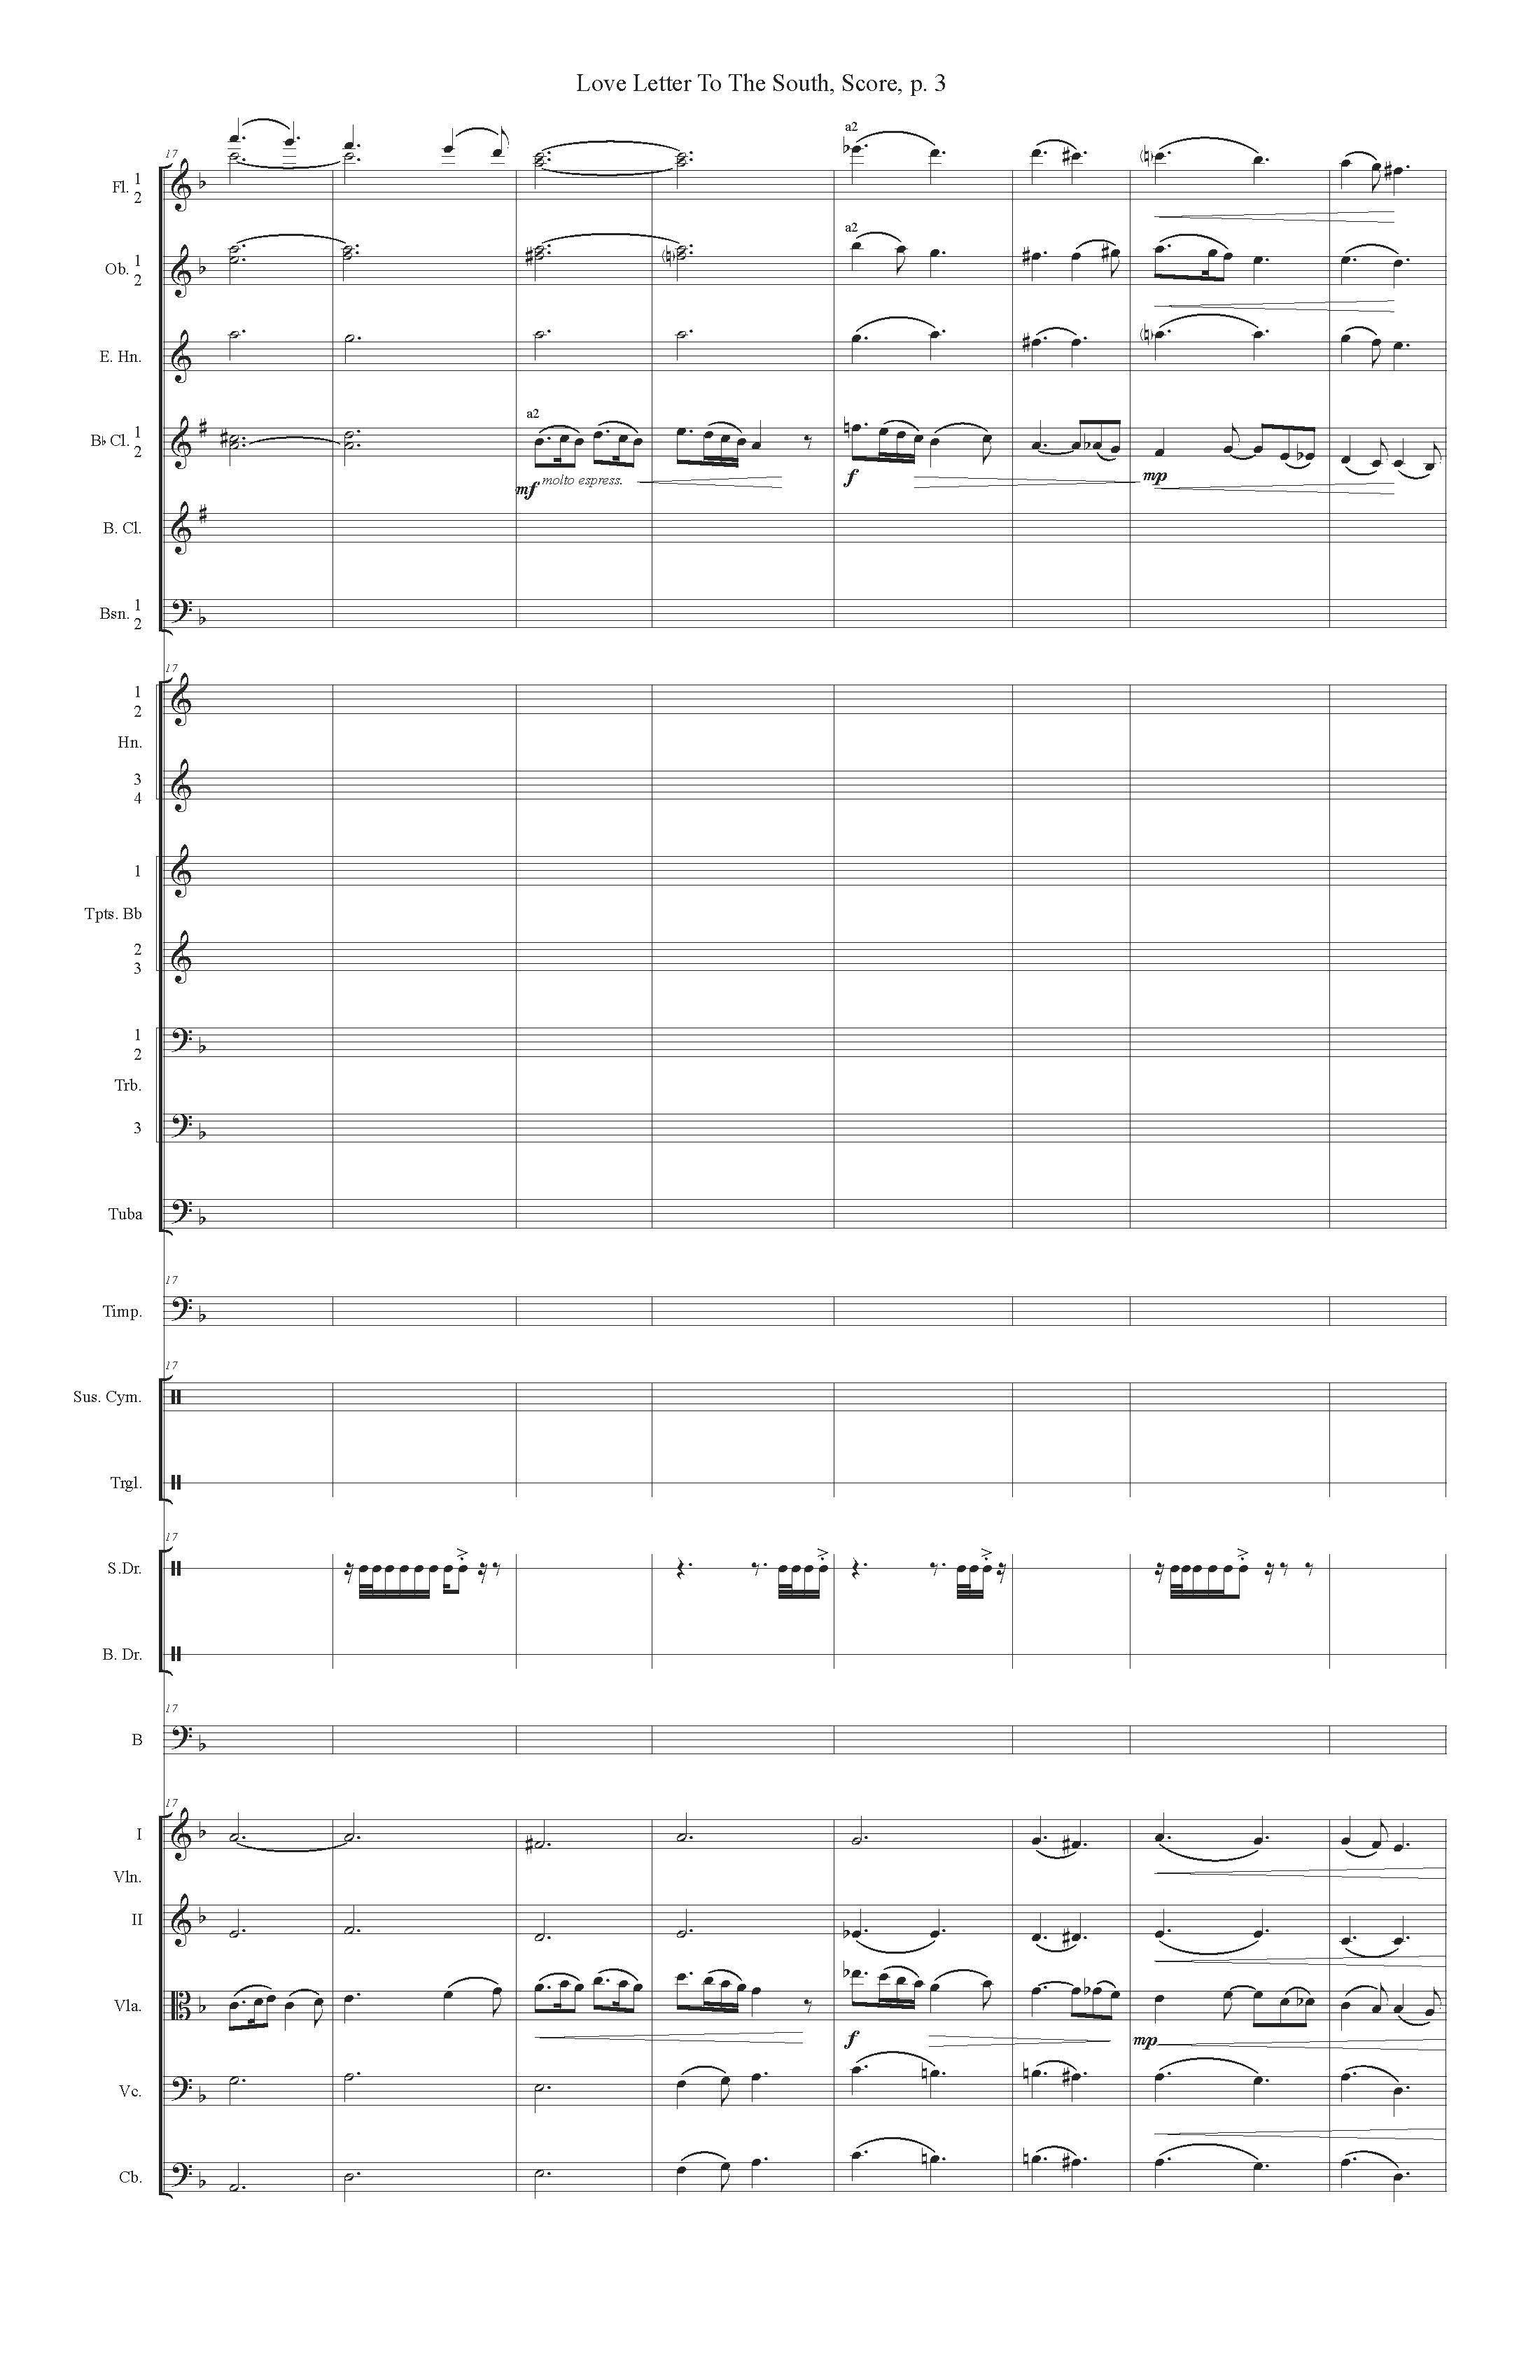 LOVE LETTER TO THE SOUTH ORCH - Score_Page_03.jpg